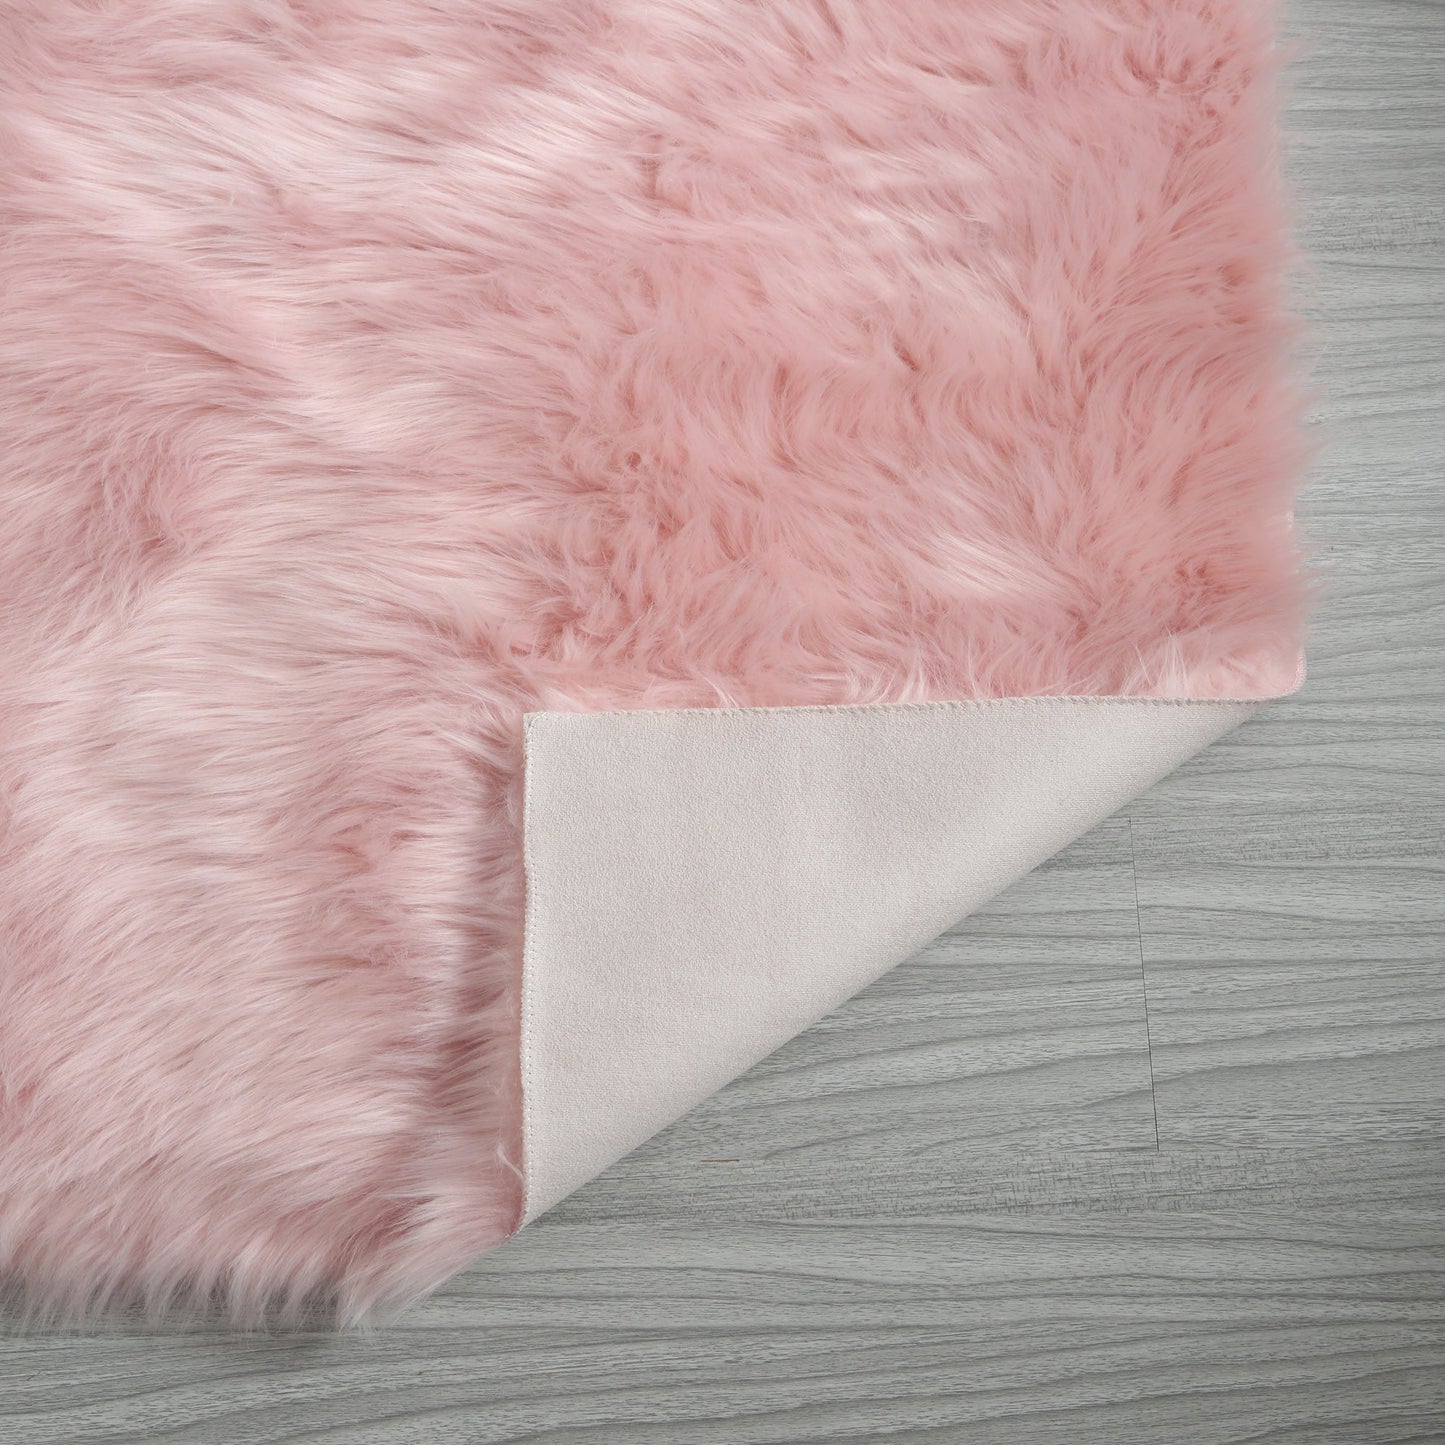 Cozy Ultra Soft Fluffy Faux Fur Pink Area Rug